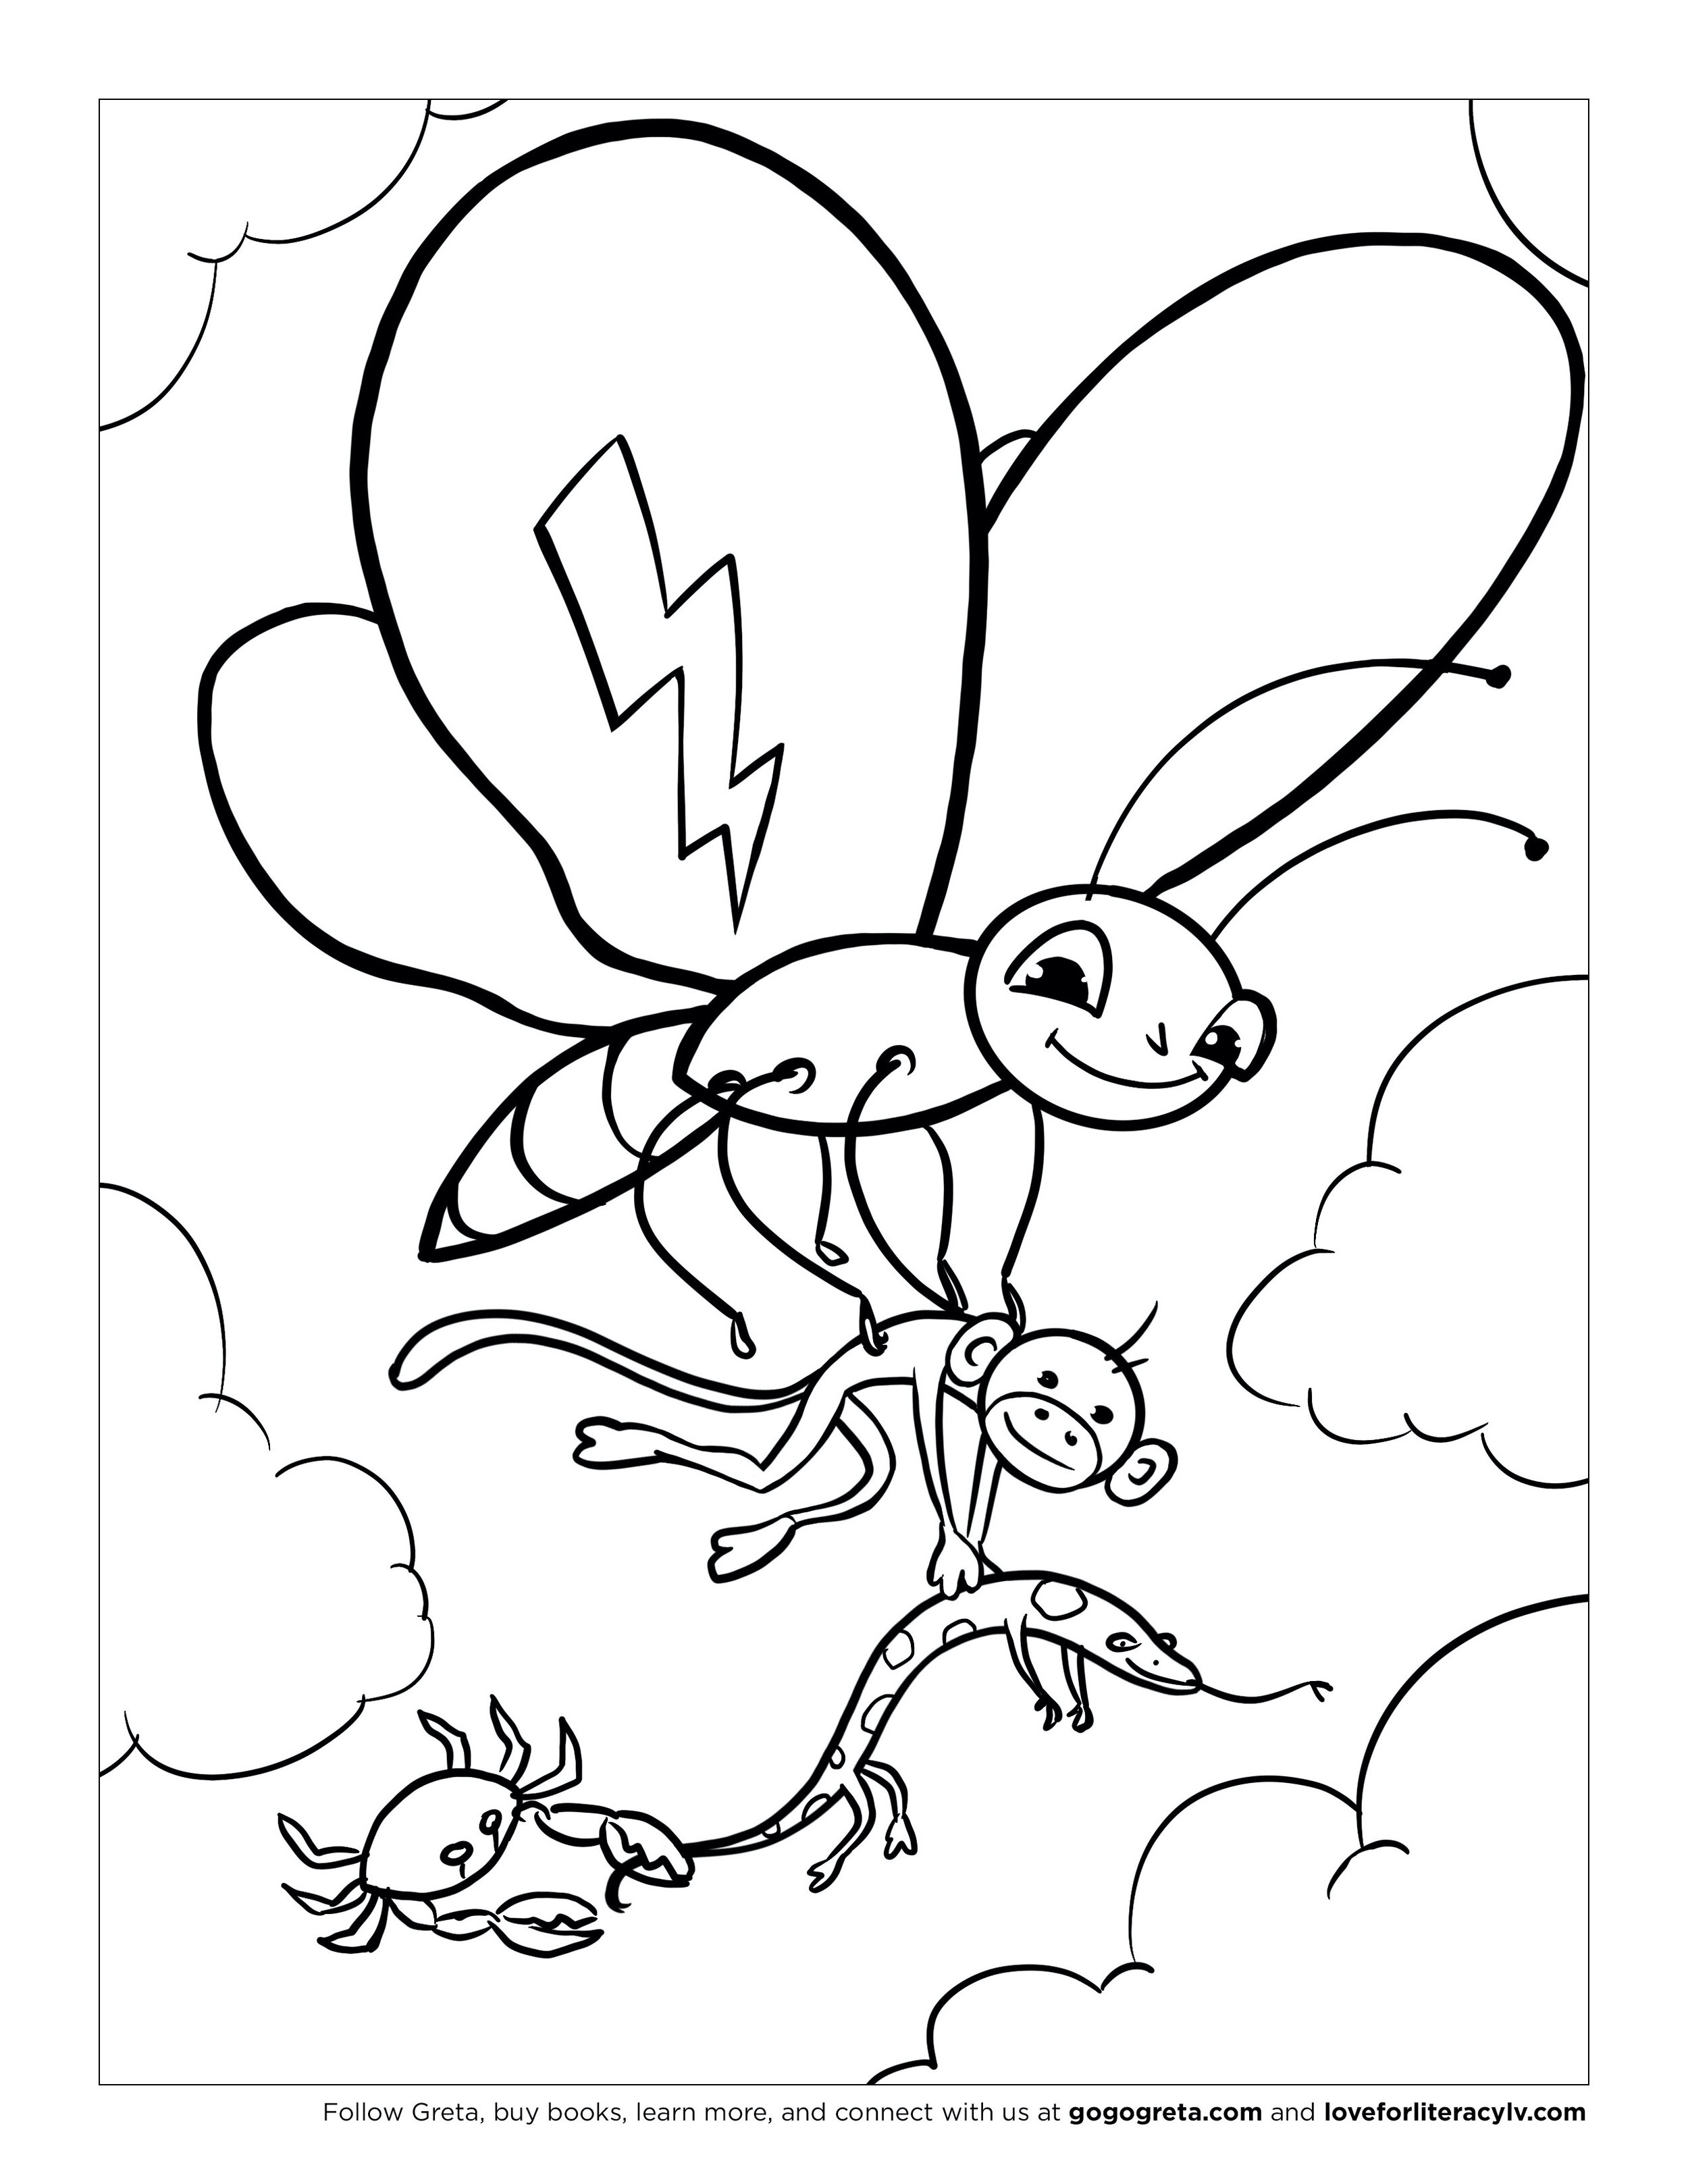 Greta_Butterfly_Coloring Page_032021.jpg